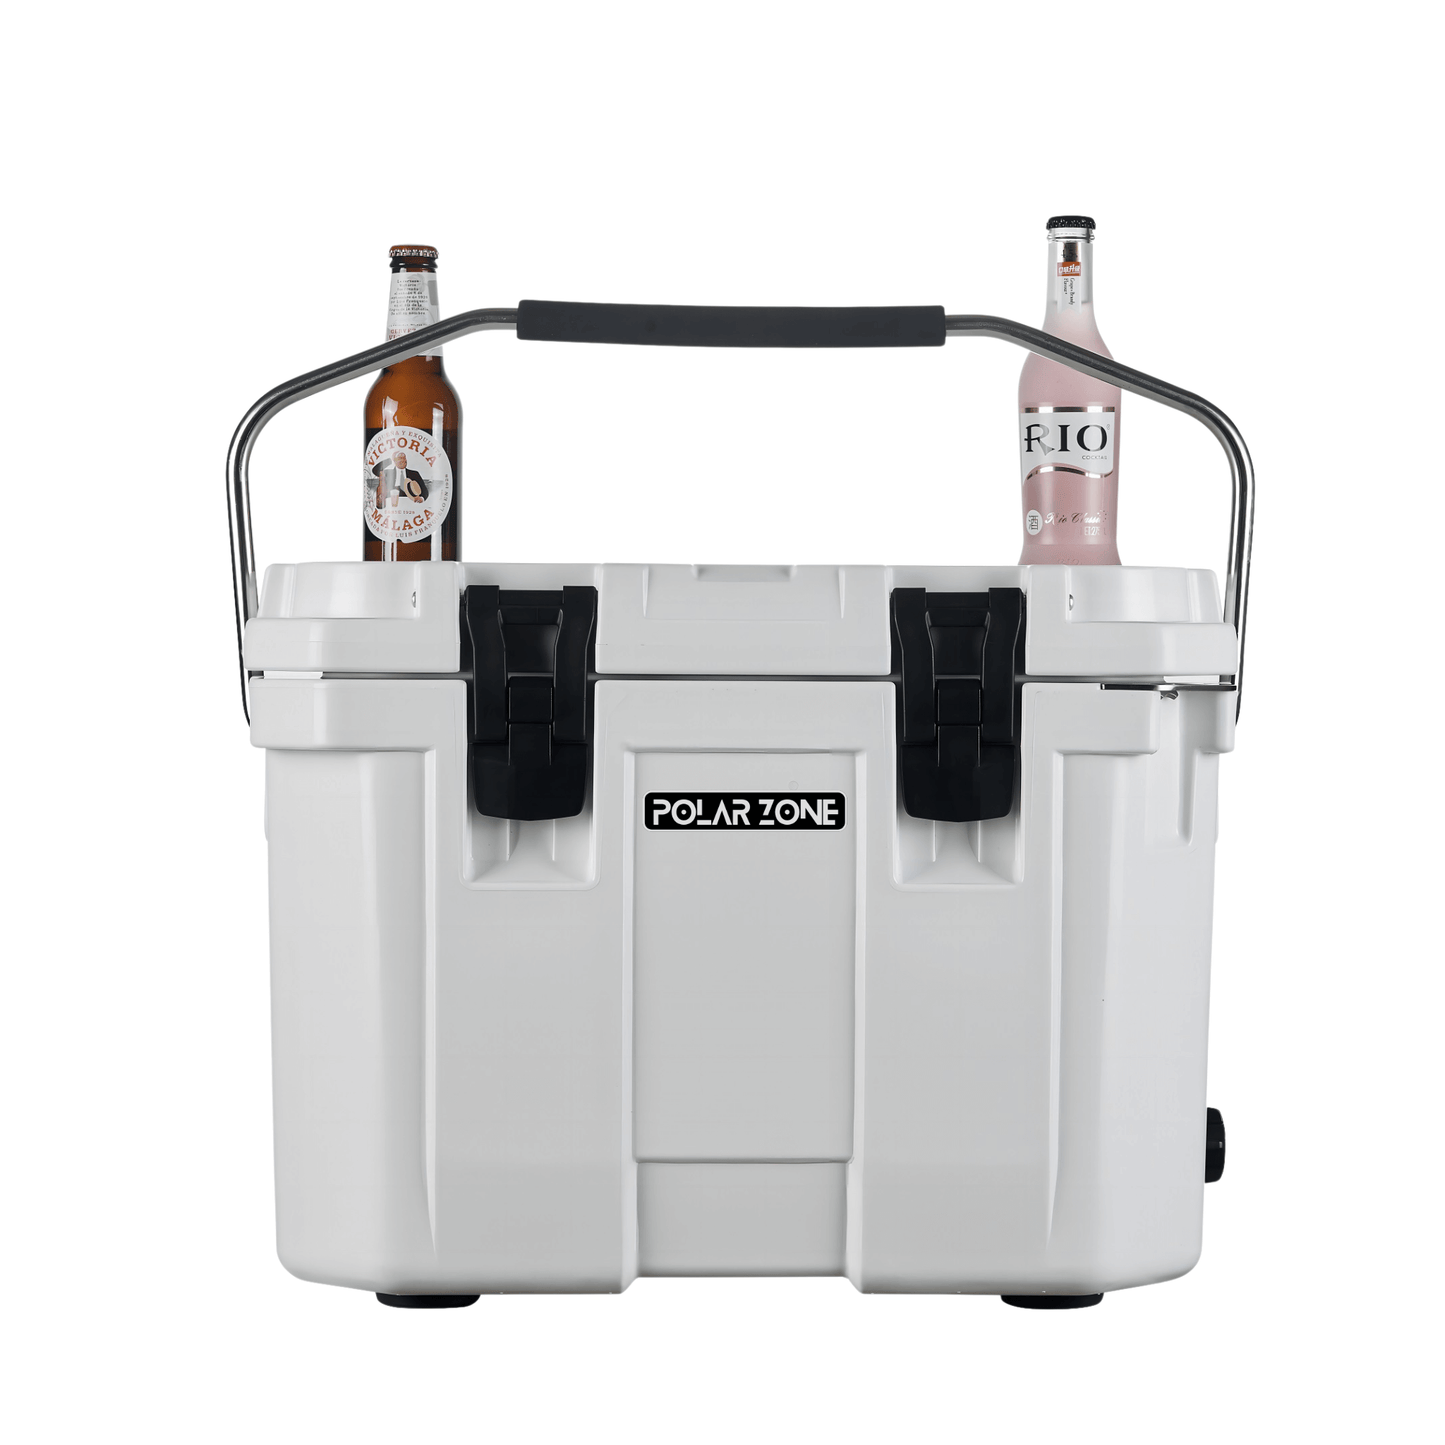 Polar Zone Hard Cooler for Camping, Fishing and Outdoor-Advent 25 Cooler Box